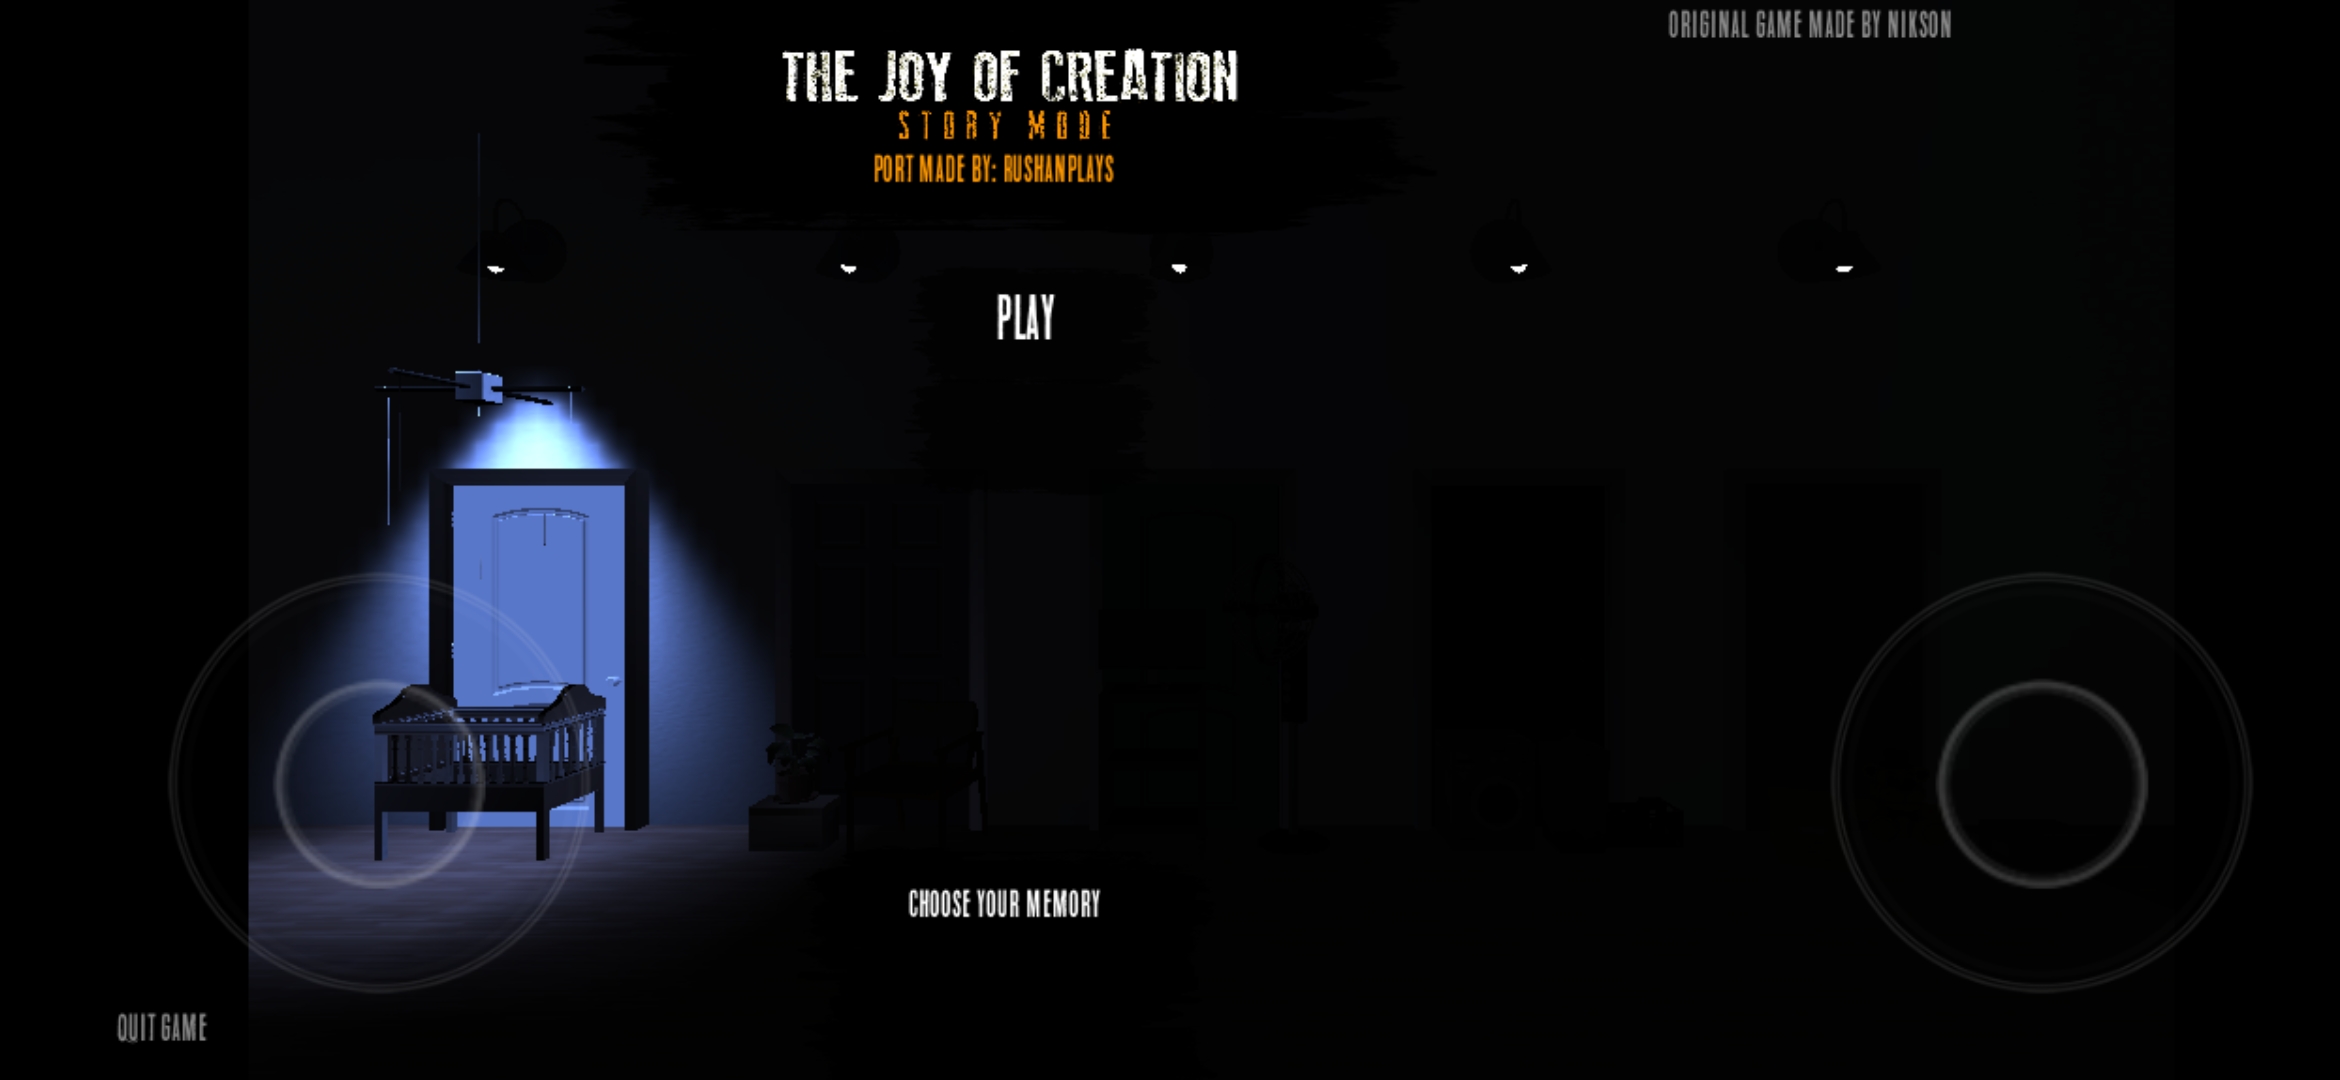 The Joy Of Creations-Storymode Mobile for Android - Download the